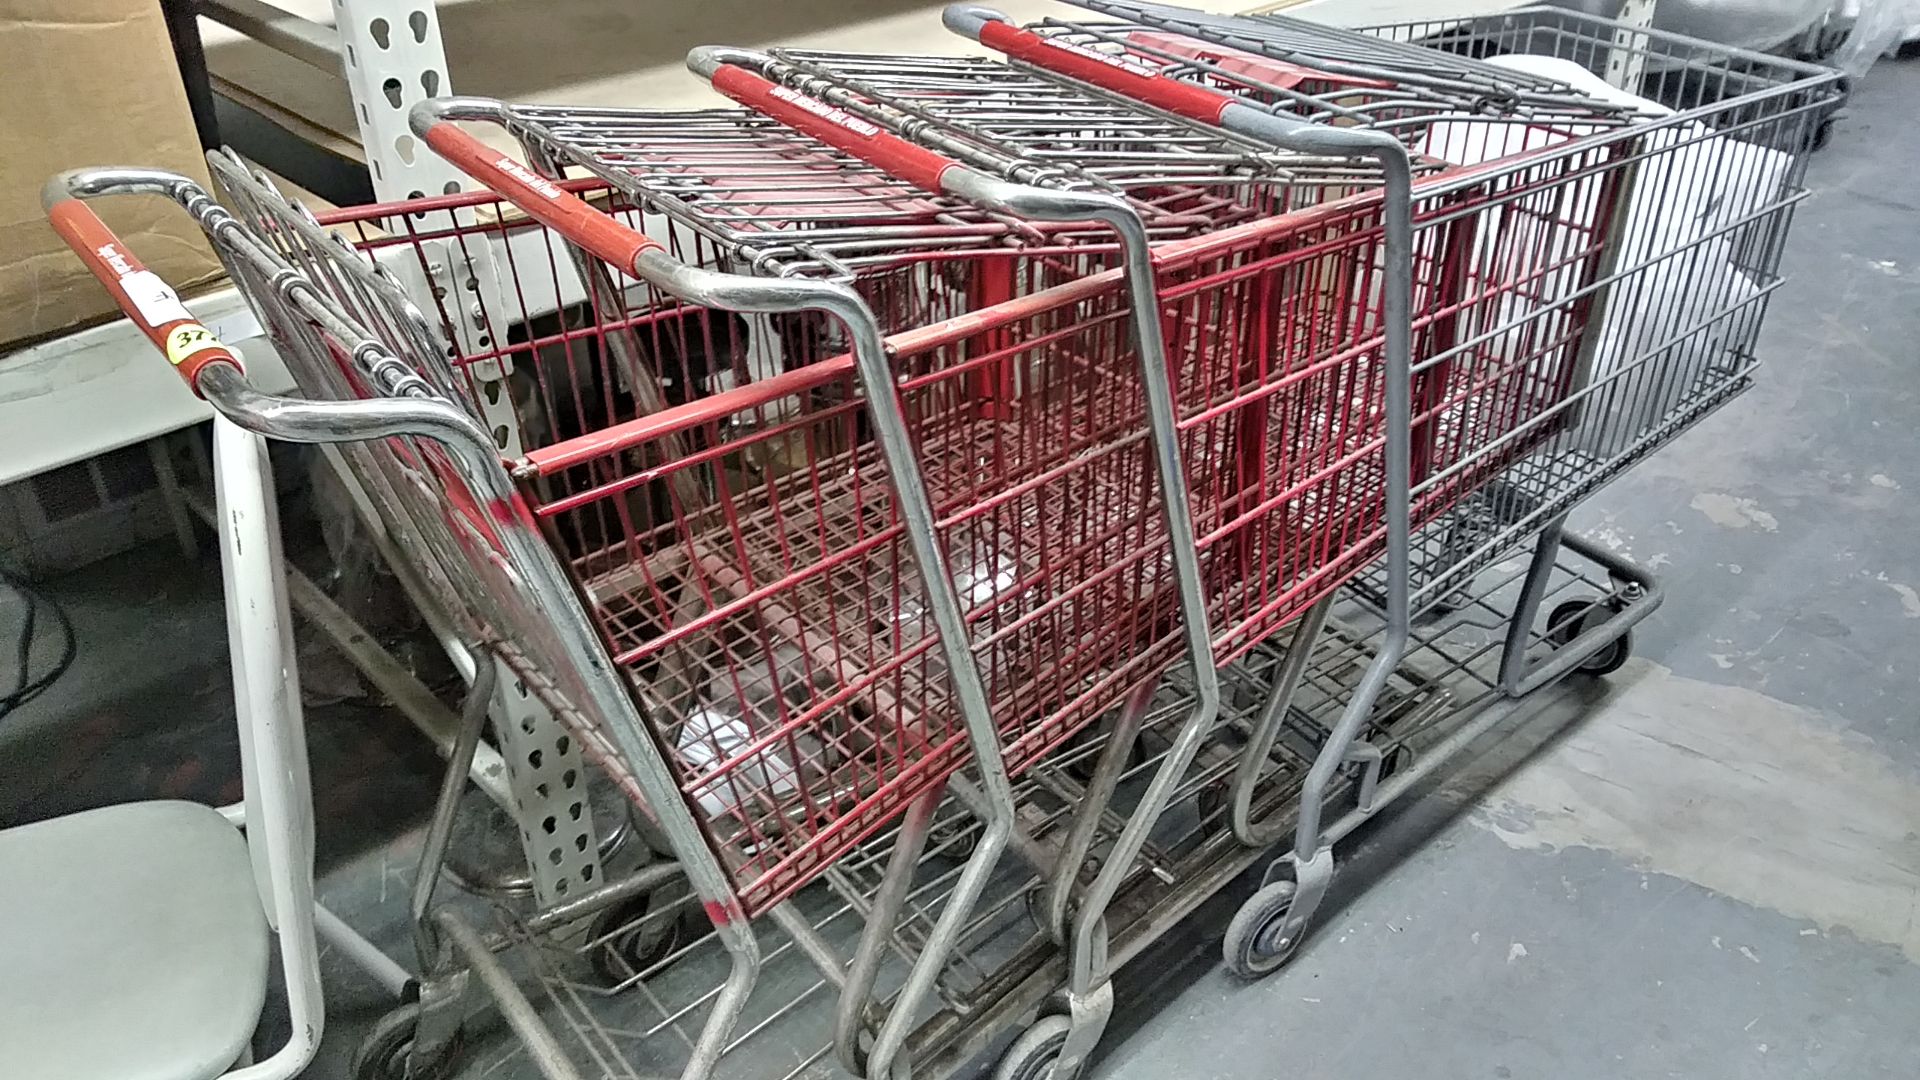 SHOPPING CARTS (INCLUDES QTY 4) - Image 2 of 2